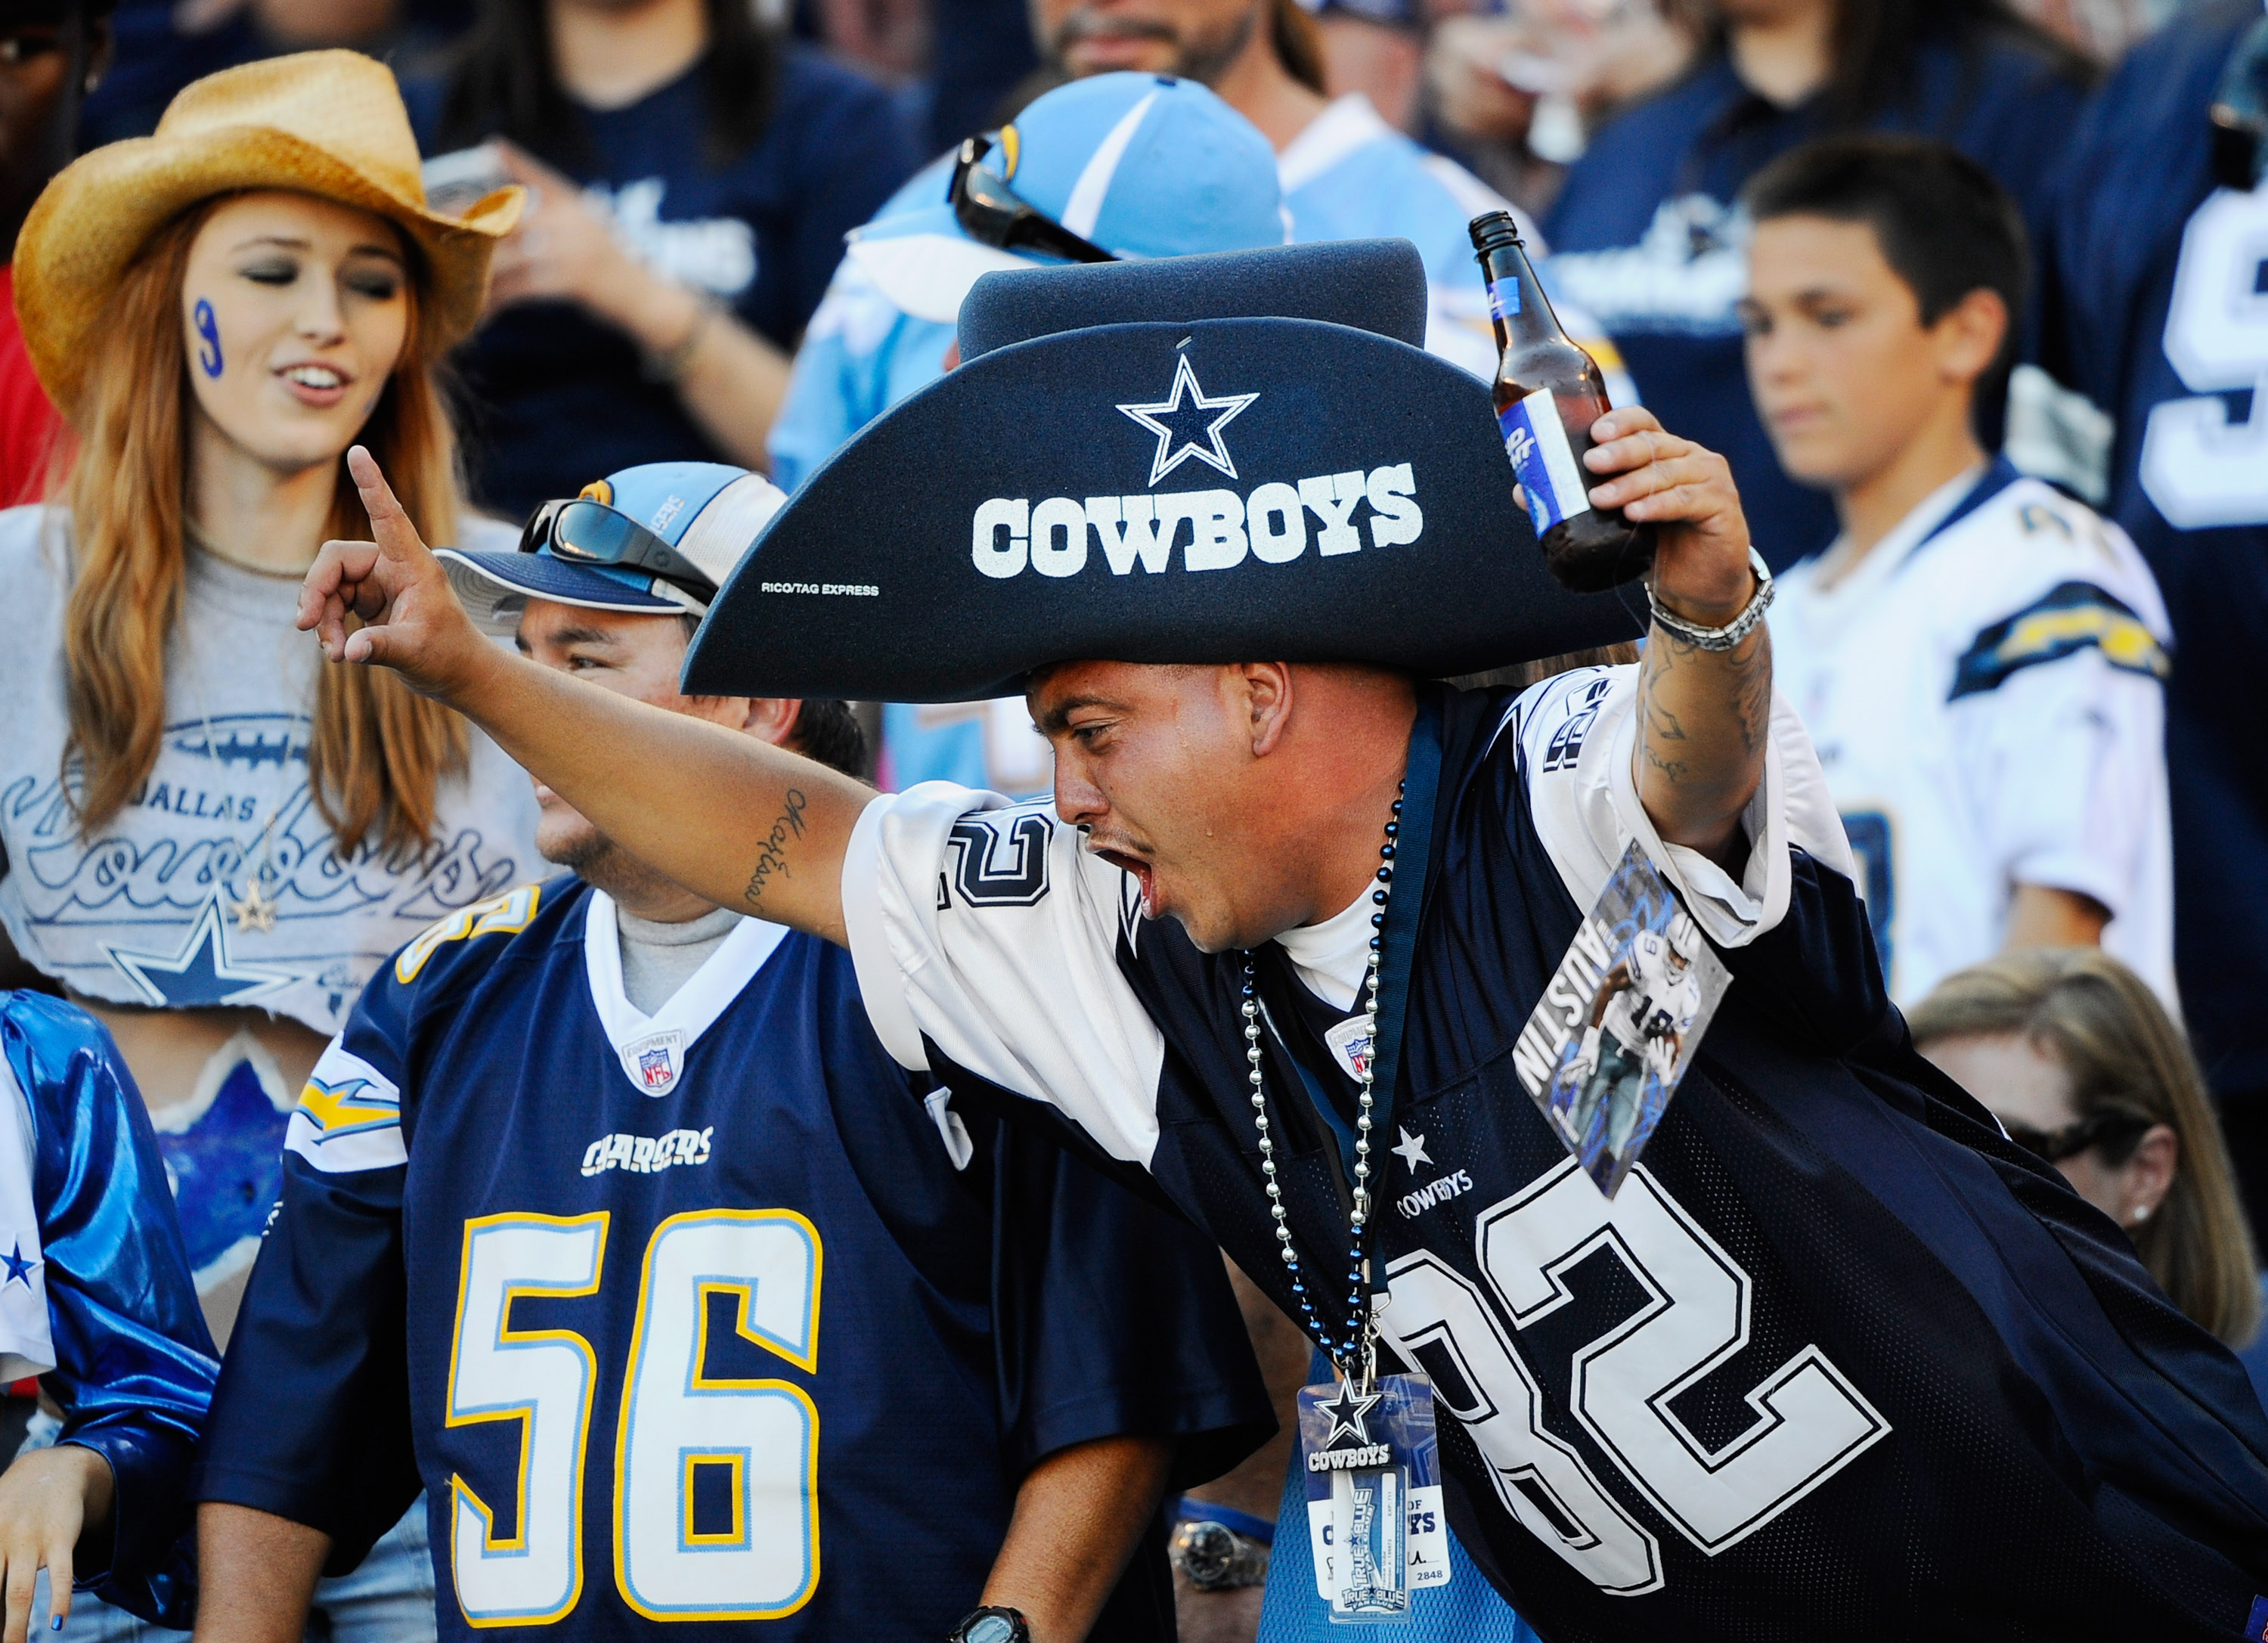 SAN DIEGO - AUGUST 21:  Fans of Dallas Cowboys cheer during the pre-season NFL football game against San Diego Chargers at Qualcomm Stadium on August 21, 2010 in San Diego, California.  (Photo by Kevork Djansezian/Getty Images)